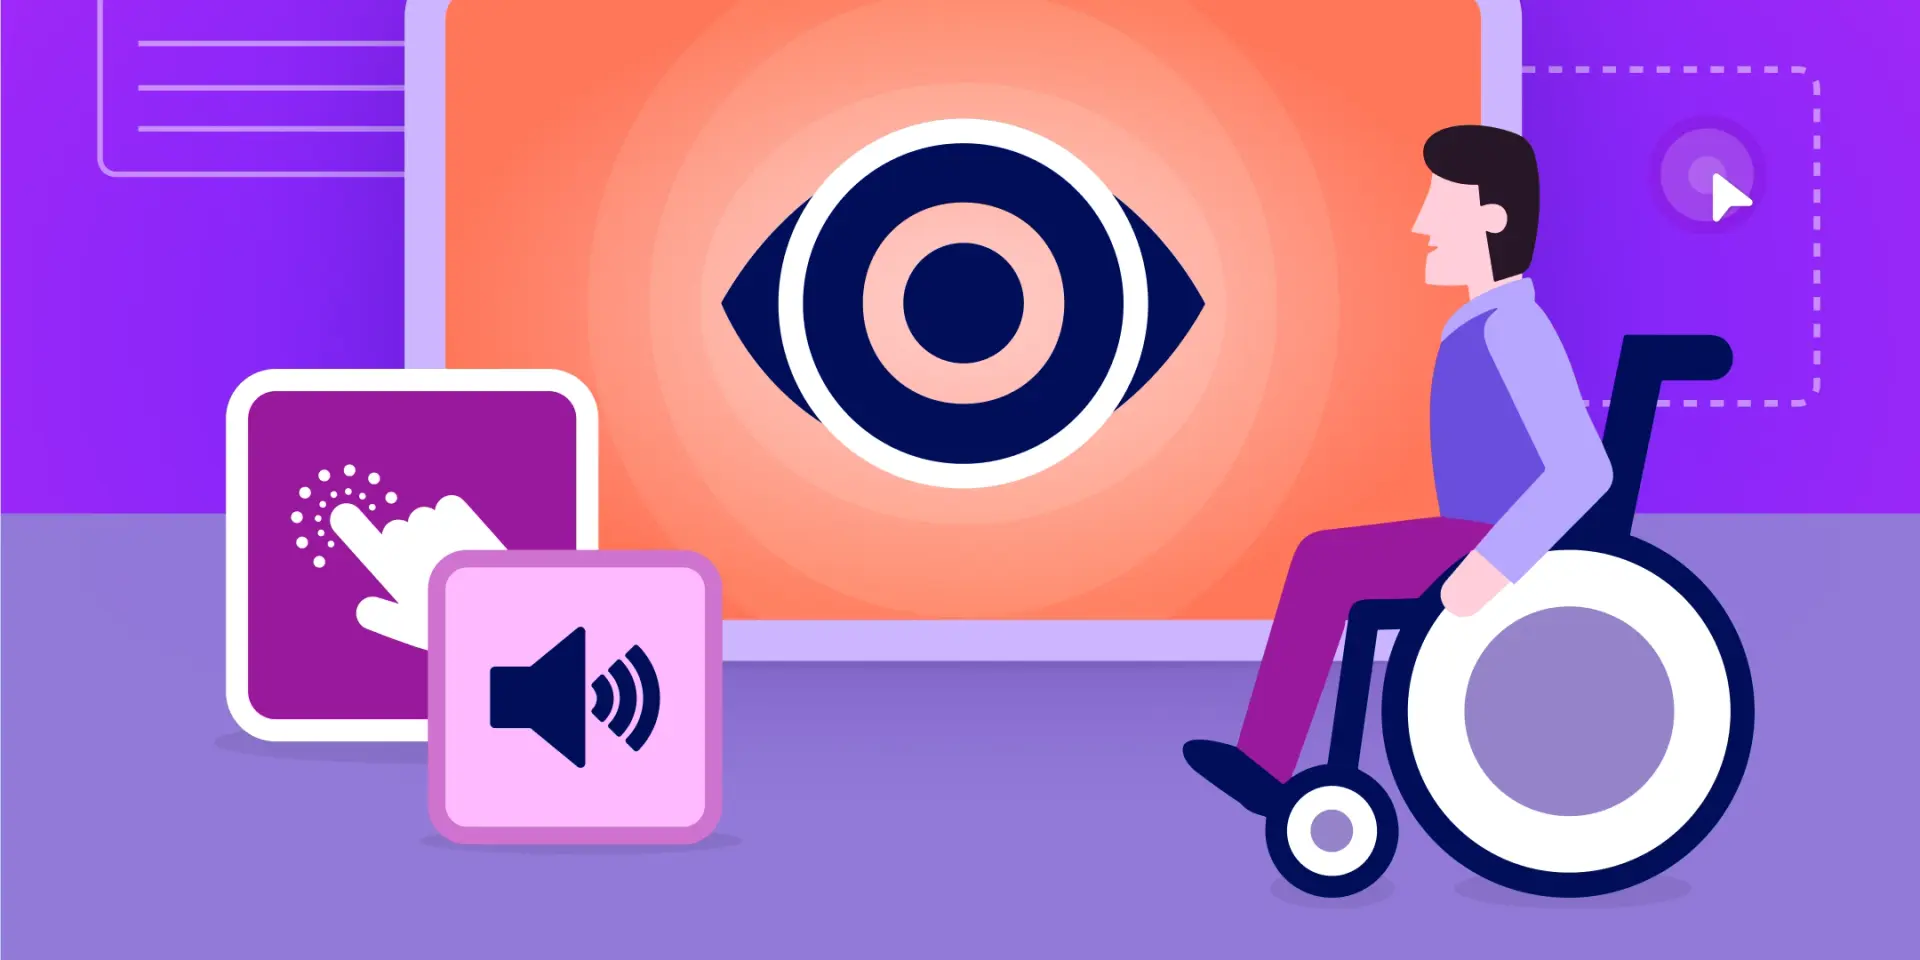 A graphic illustration of a computer screen next to a man in a wheelchair. Symbols representing accessibility - an eye, a cursor icon and a speaker graphic - appear throughout the design.